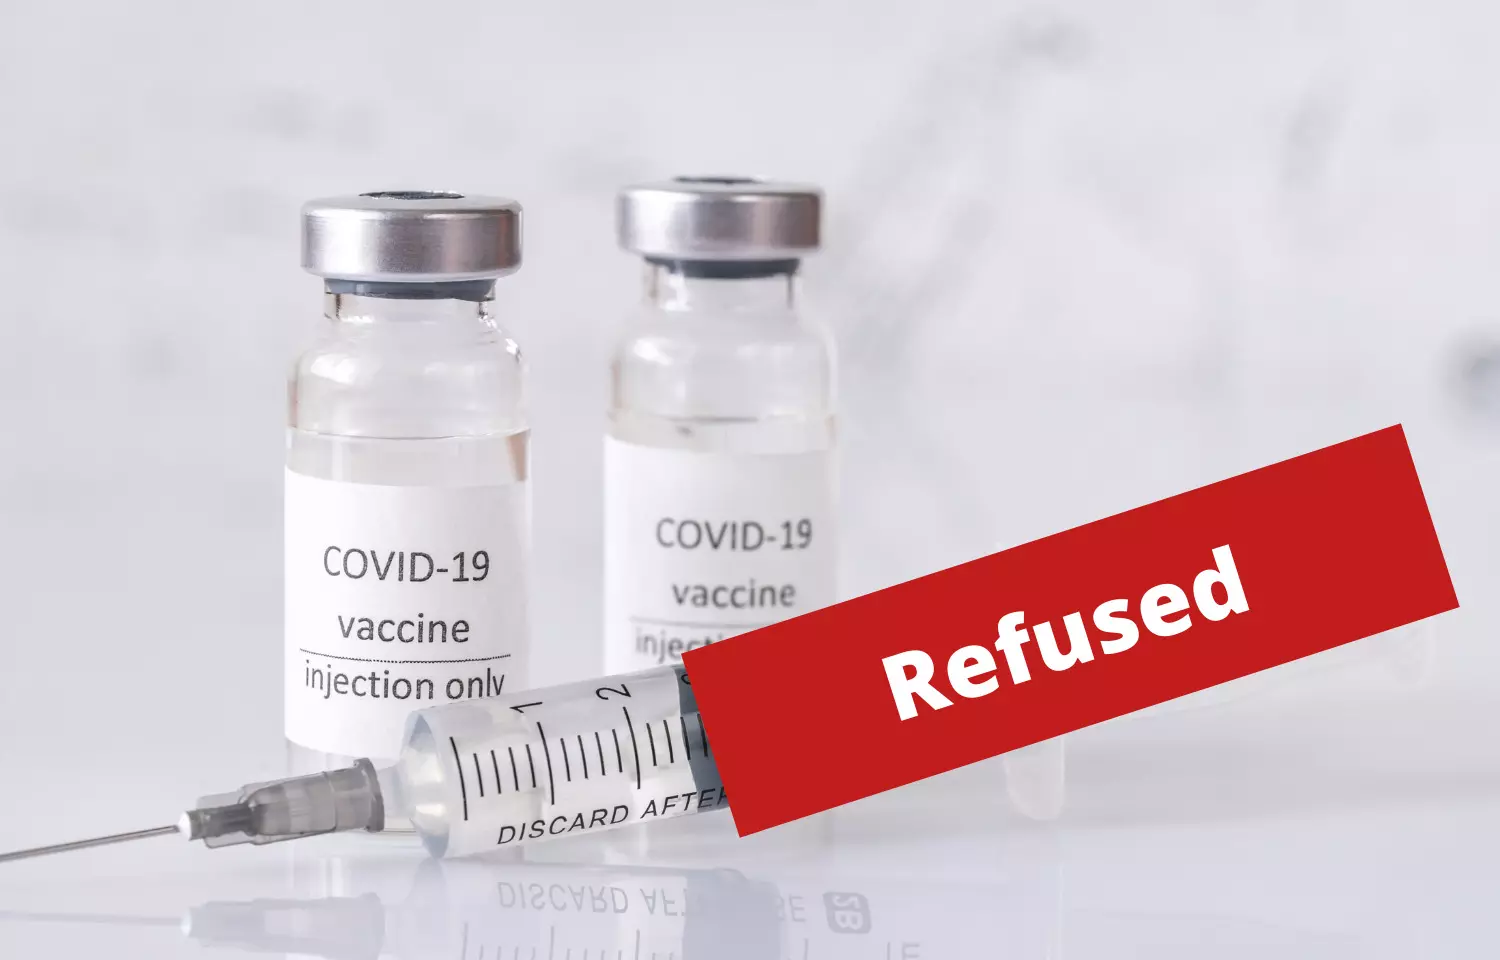 Poorer nations refuse millions of AstraZeneca COVID vaccines from COVAX: Document